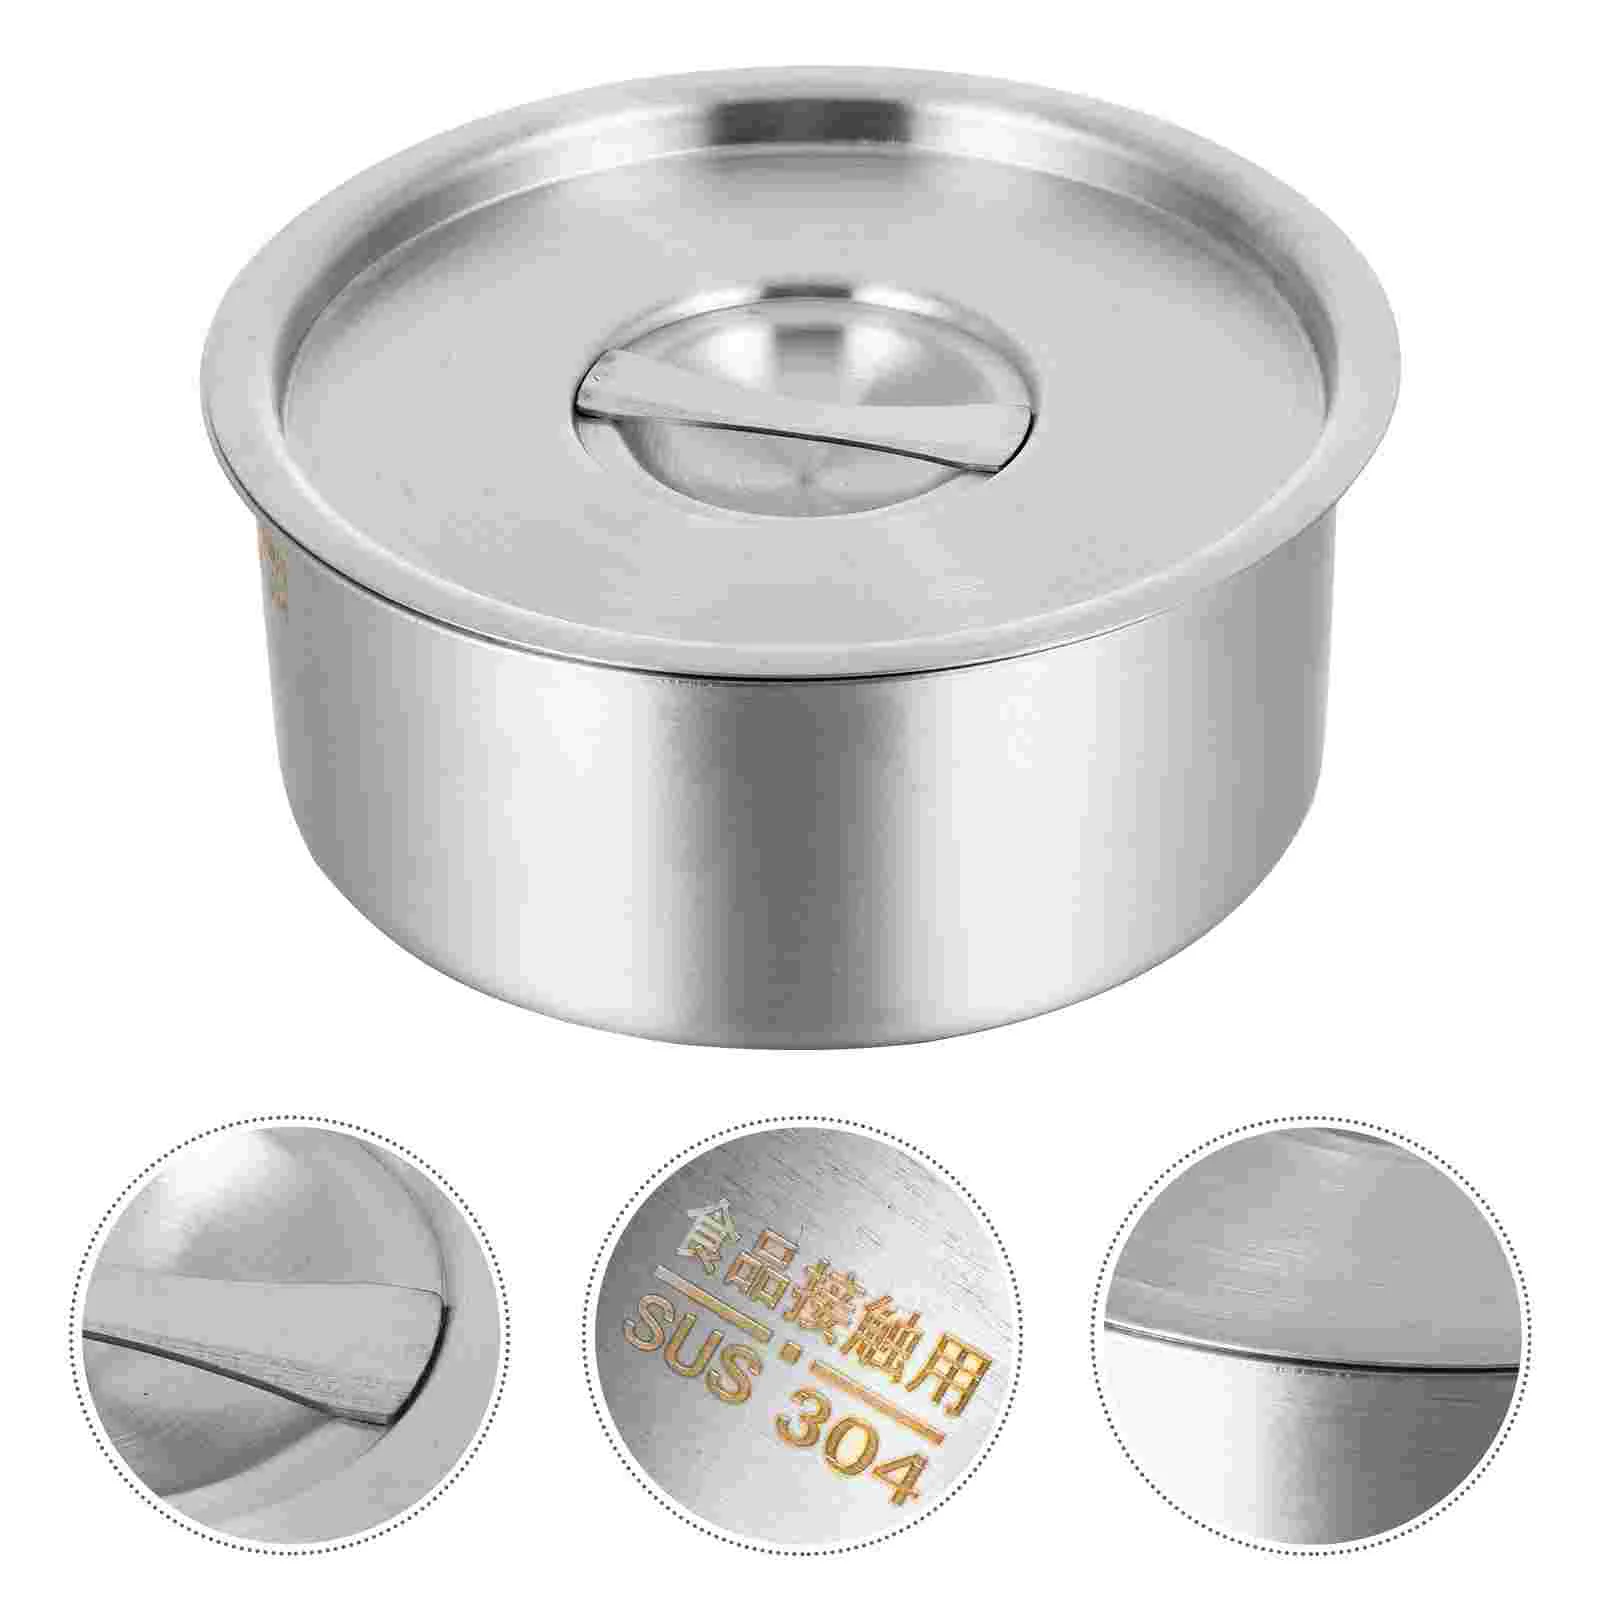 

Bowl Steamed Stainless Cuisine Portable Dessert Cereal Rice Bowls Soup Serving Storage Steelheating Or Steaming Egg 304 Ramen